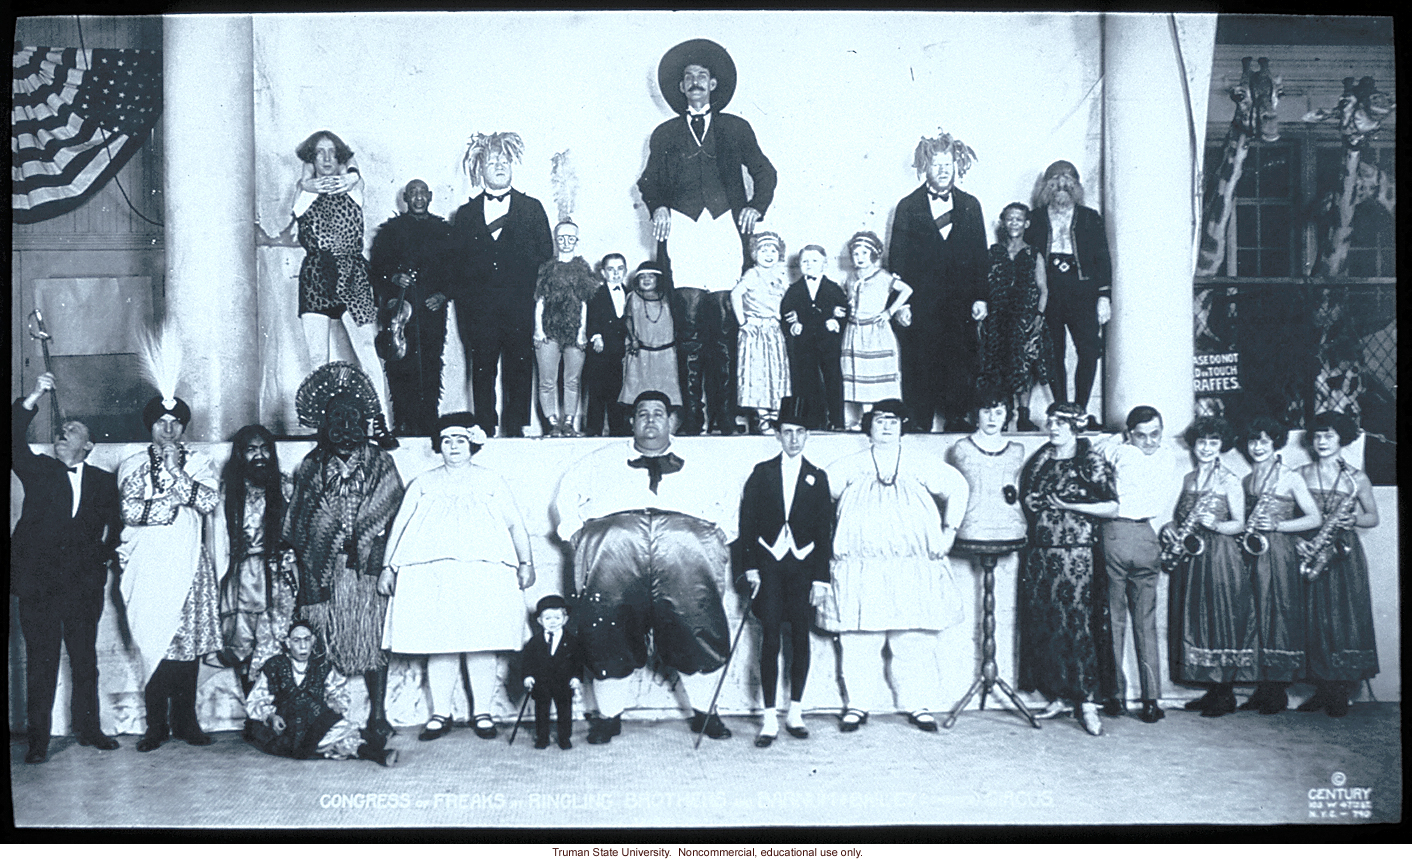 A group photo of circus acts (Congress of Freaks, Ringling Brothers Circus).